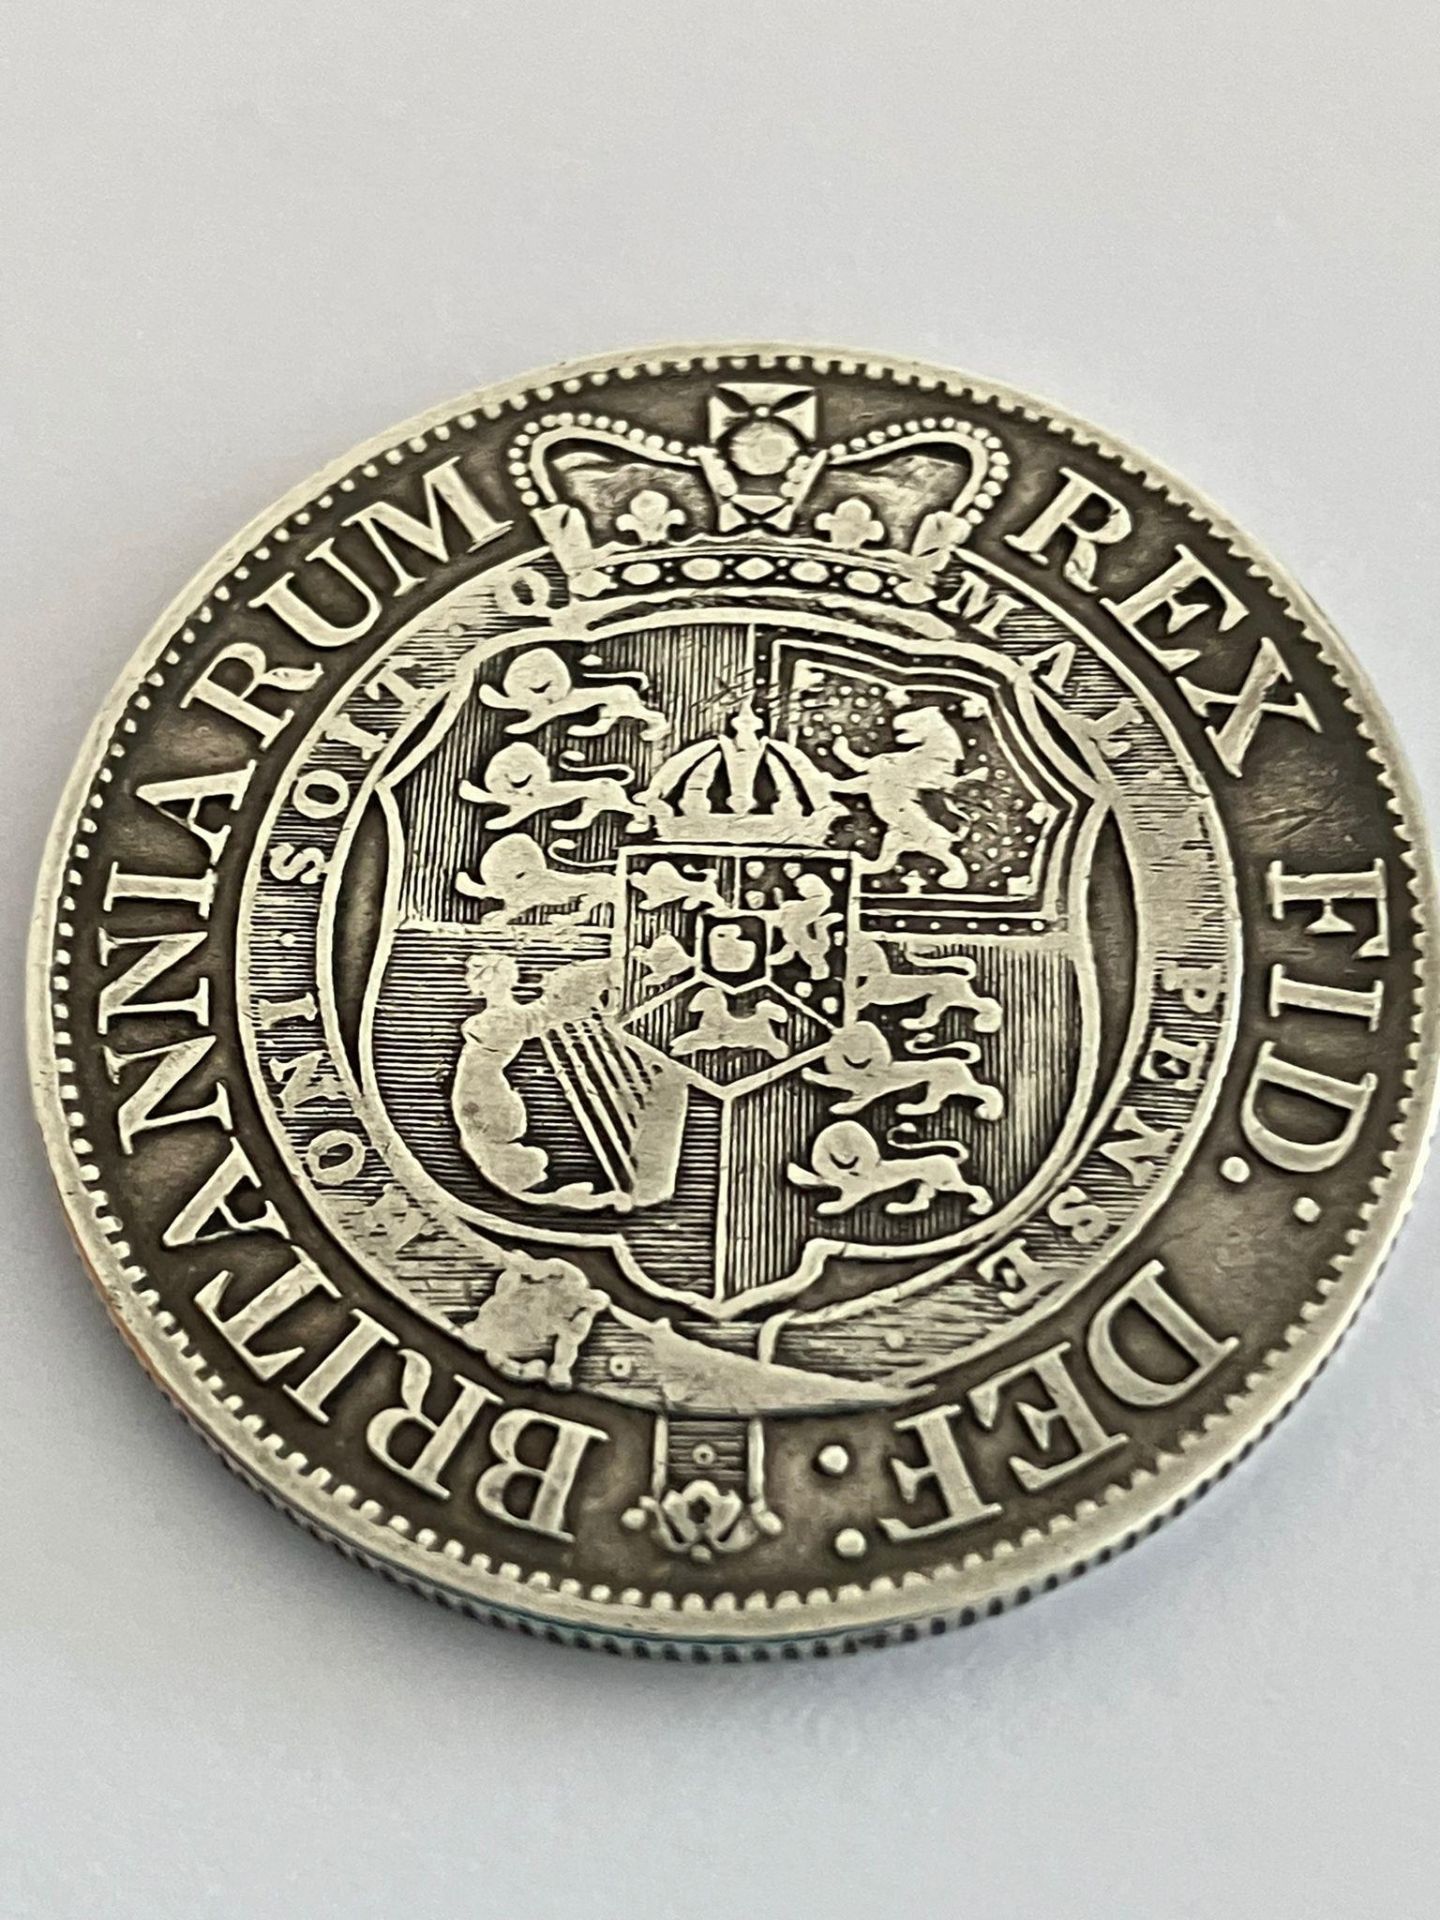 GEORGE III SILVER HALF CROWN 1819 in Very/extra fine condition. No spotting or shading. A high grade - Bild 2 aus 2